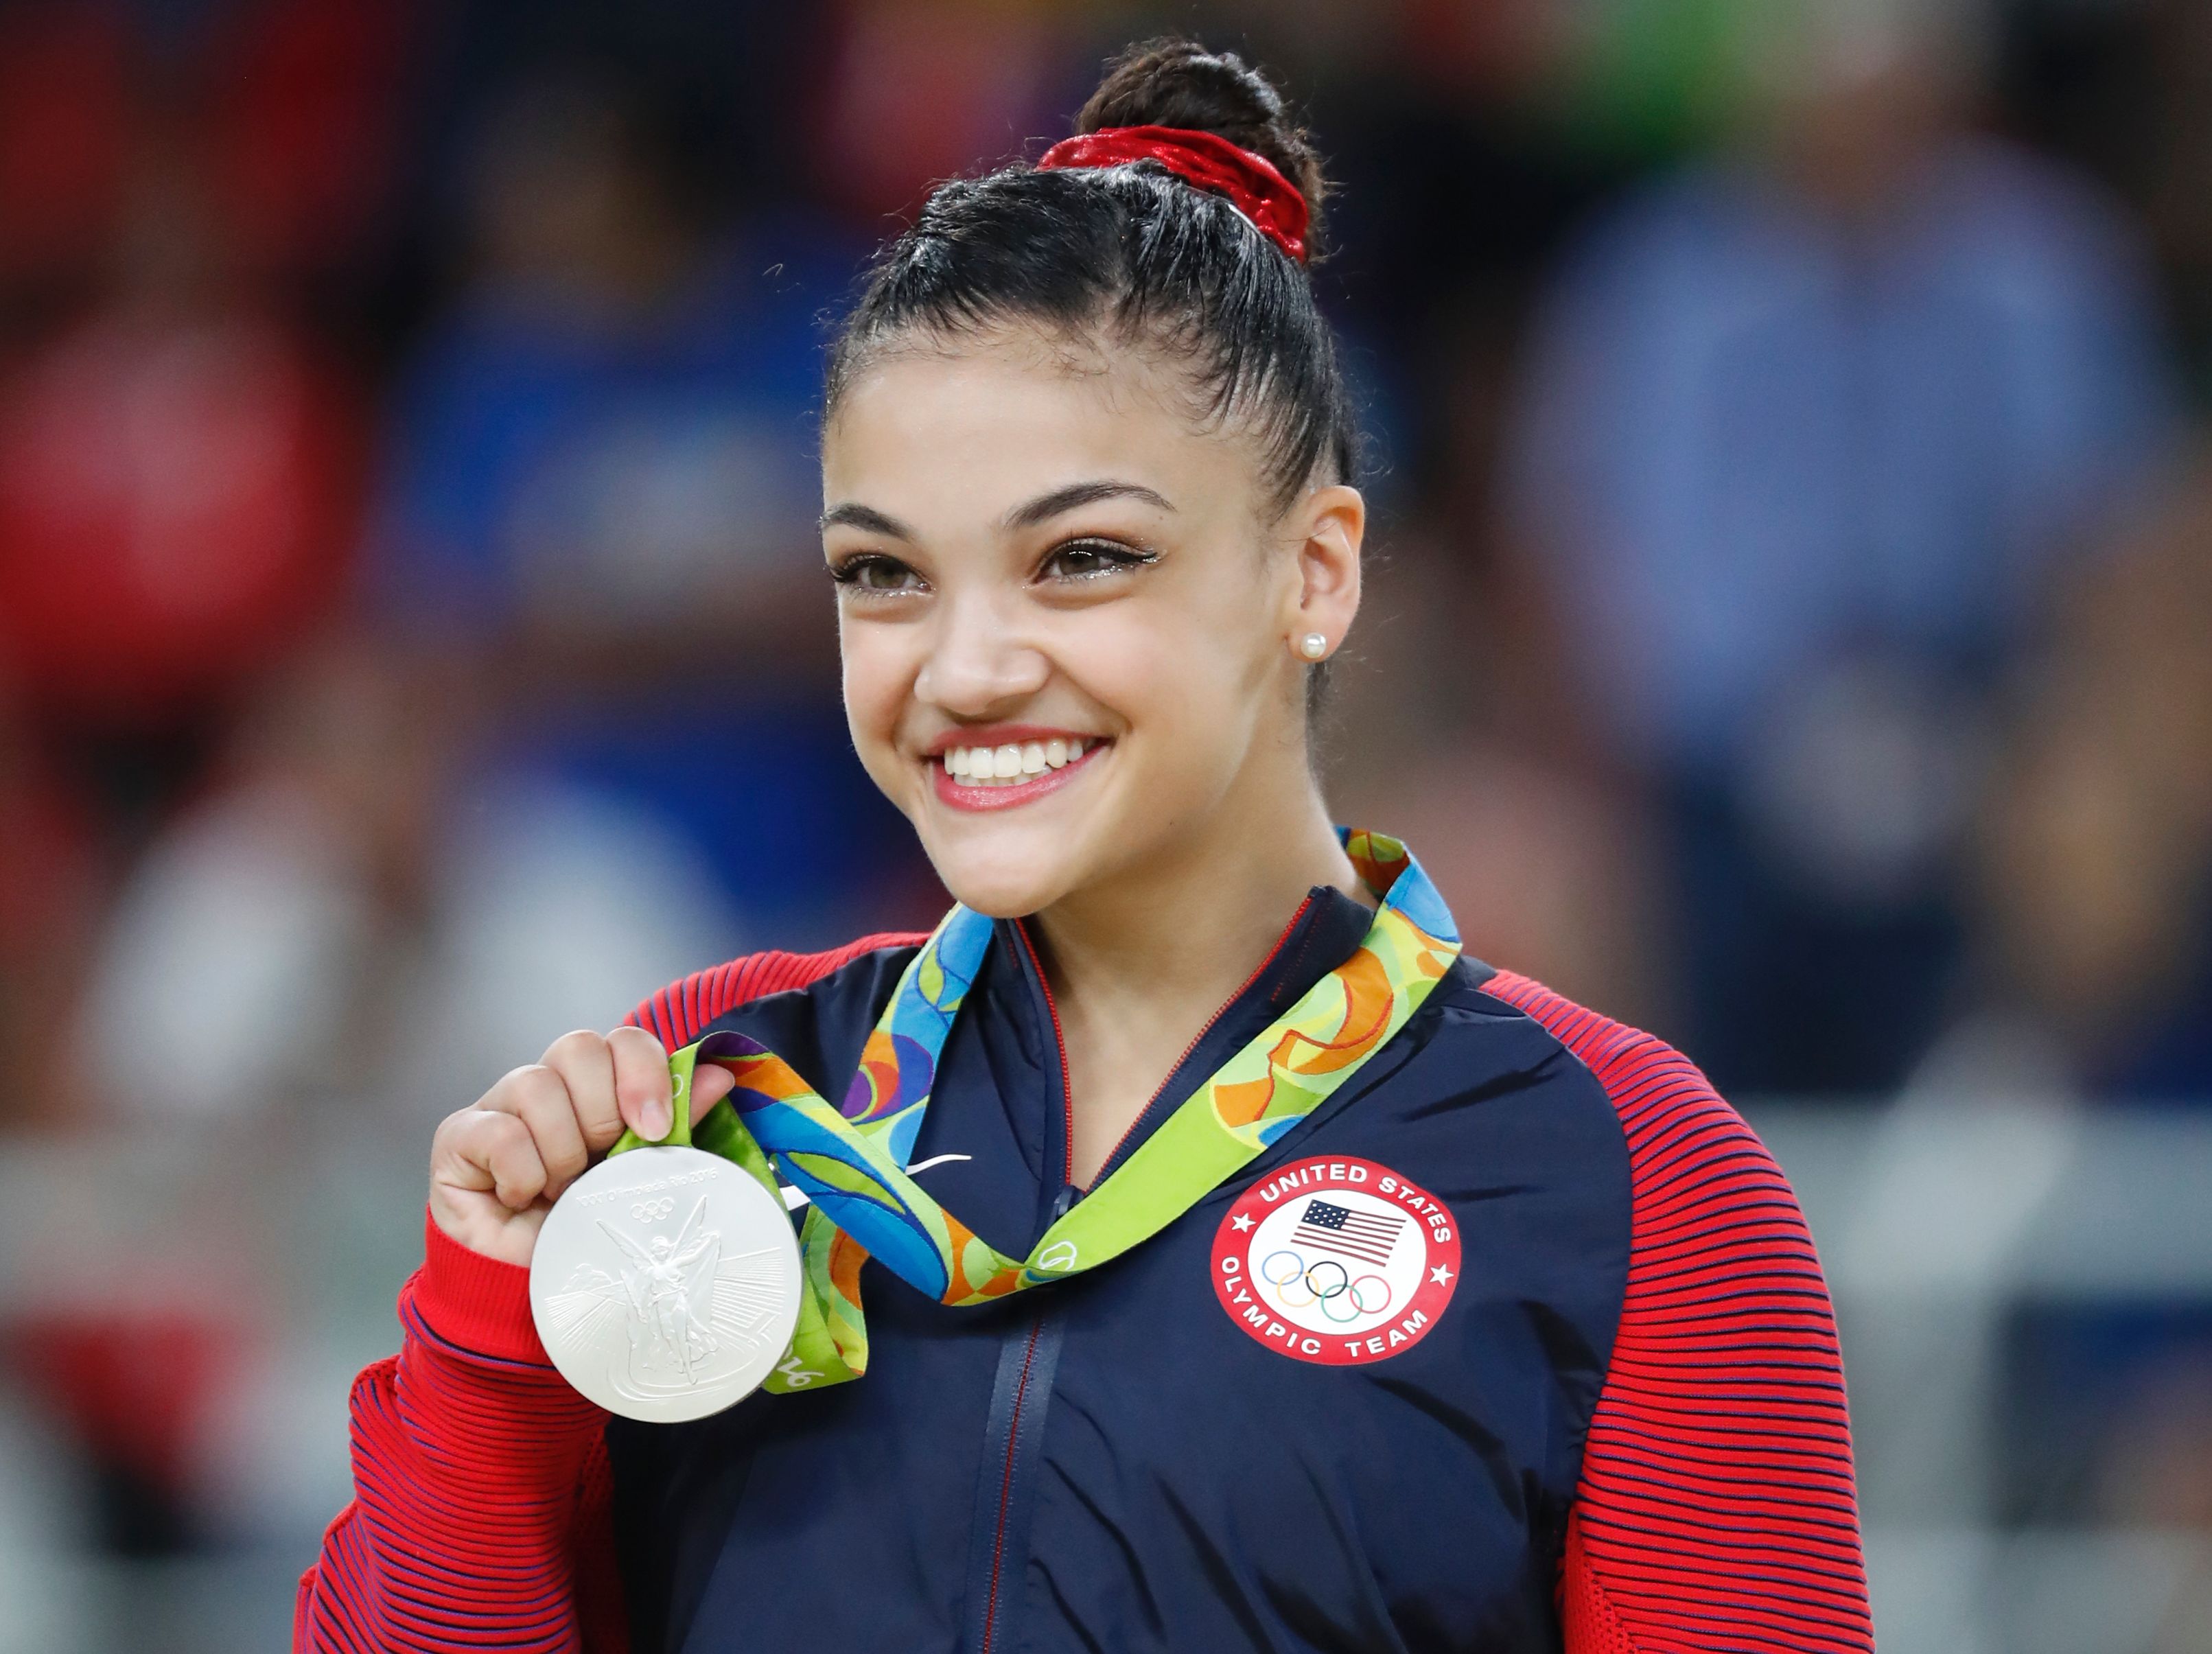 Silver medallist US gymnast Lauren Hernandez celebrates on the podium of the women's balance beam event final of the Artistic Gymnastics at the Olympic Arena during the Rio 2016 Olympic Games in Rio de Janeiro on August 15, 2016. (THOMAS COEX&mdash;AFP/Getty Images)